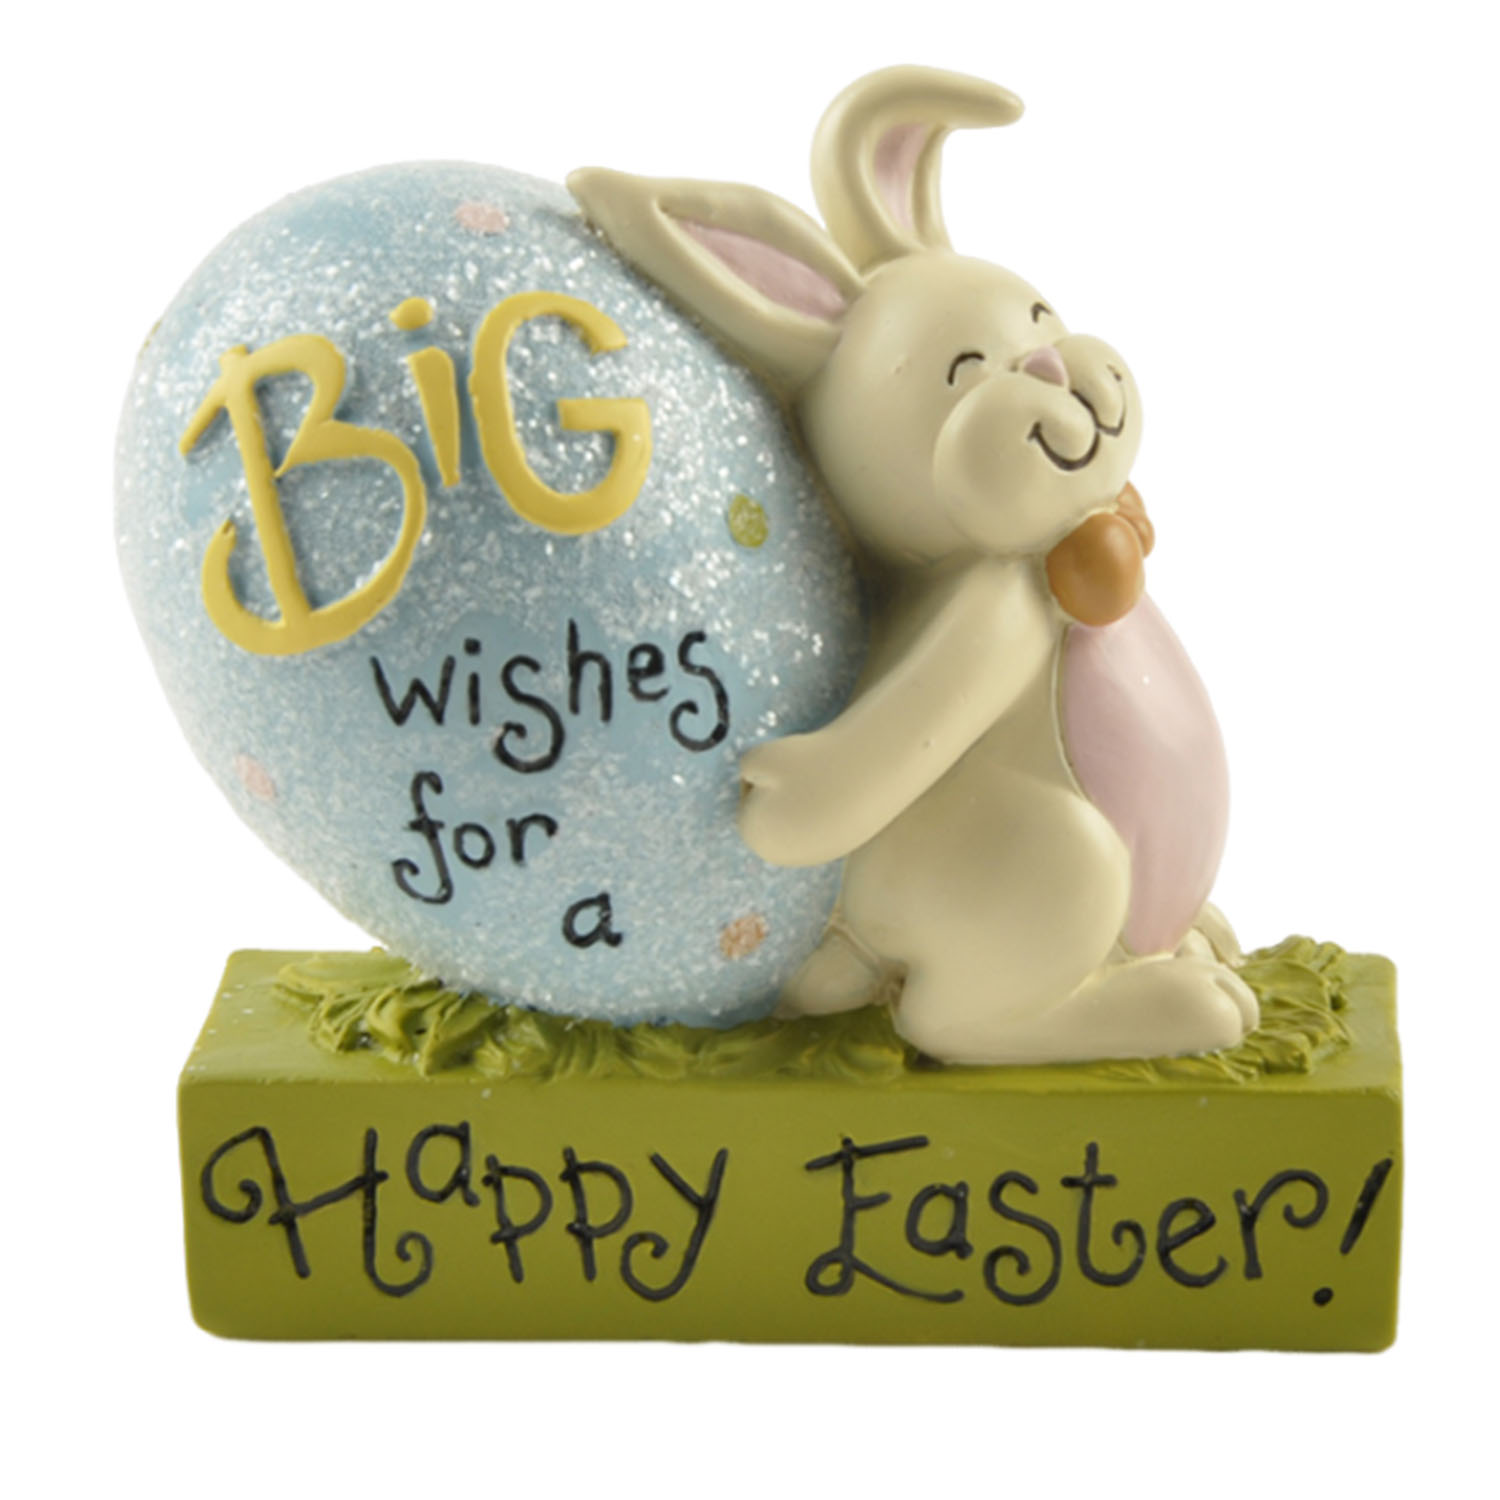 Handmade Resin Easter Figurine Big Wishes for a Happy Easter Statues Perfect for Holiday Gift and Spring Celebration 151-89252